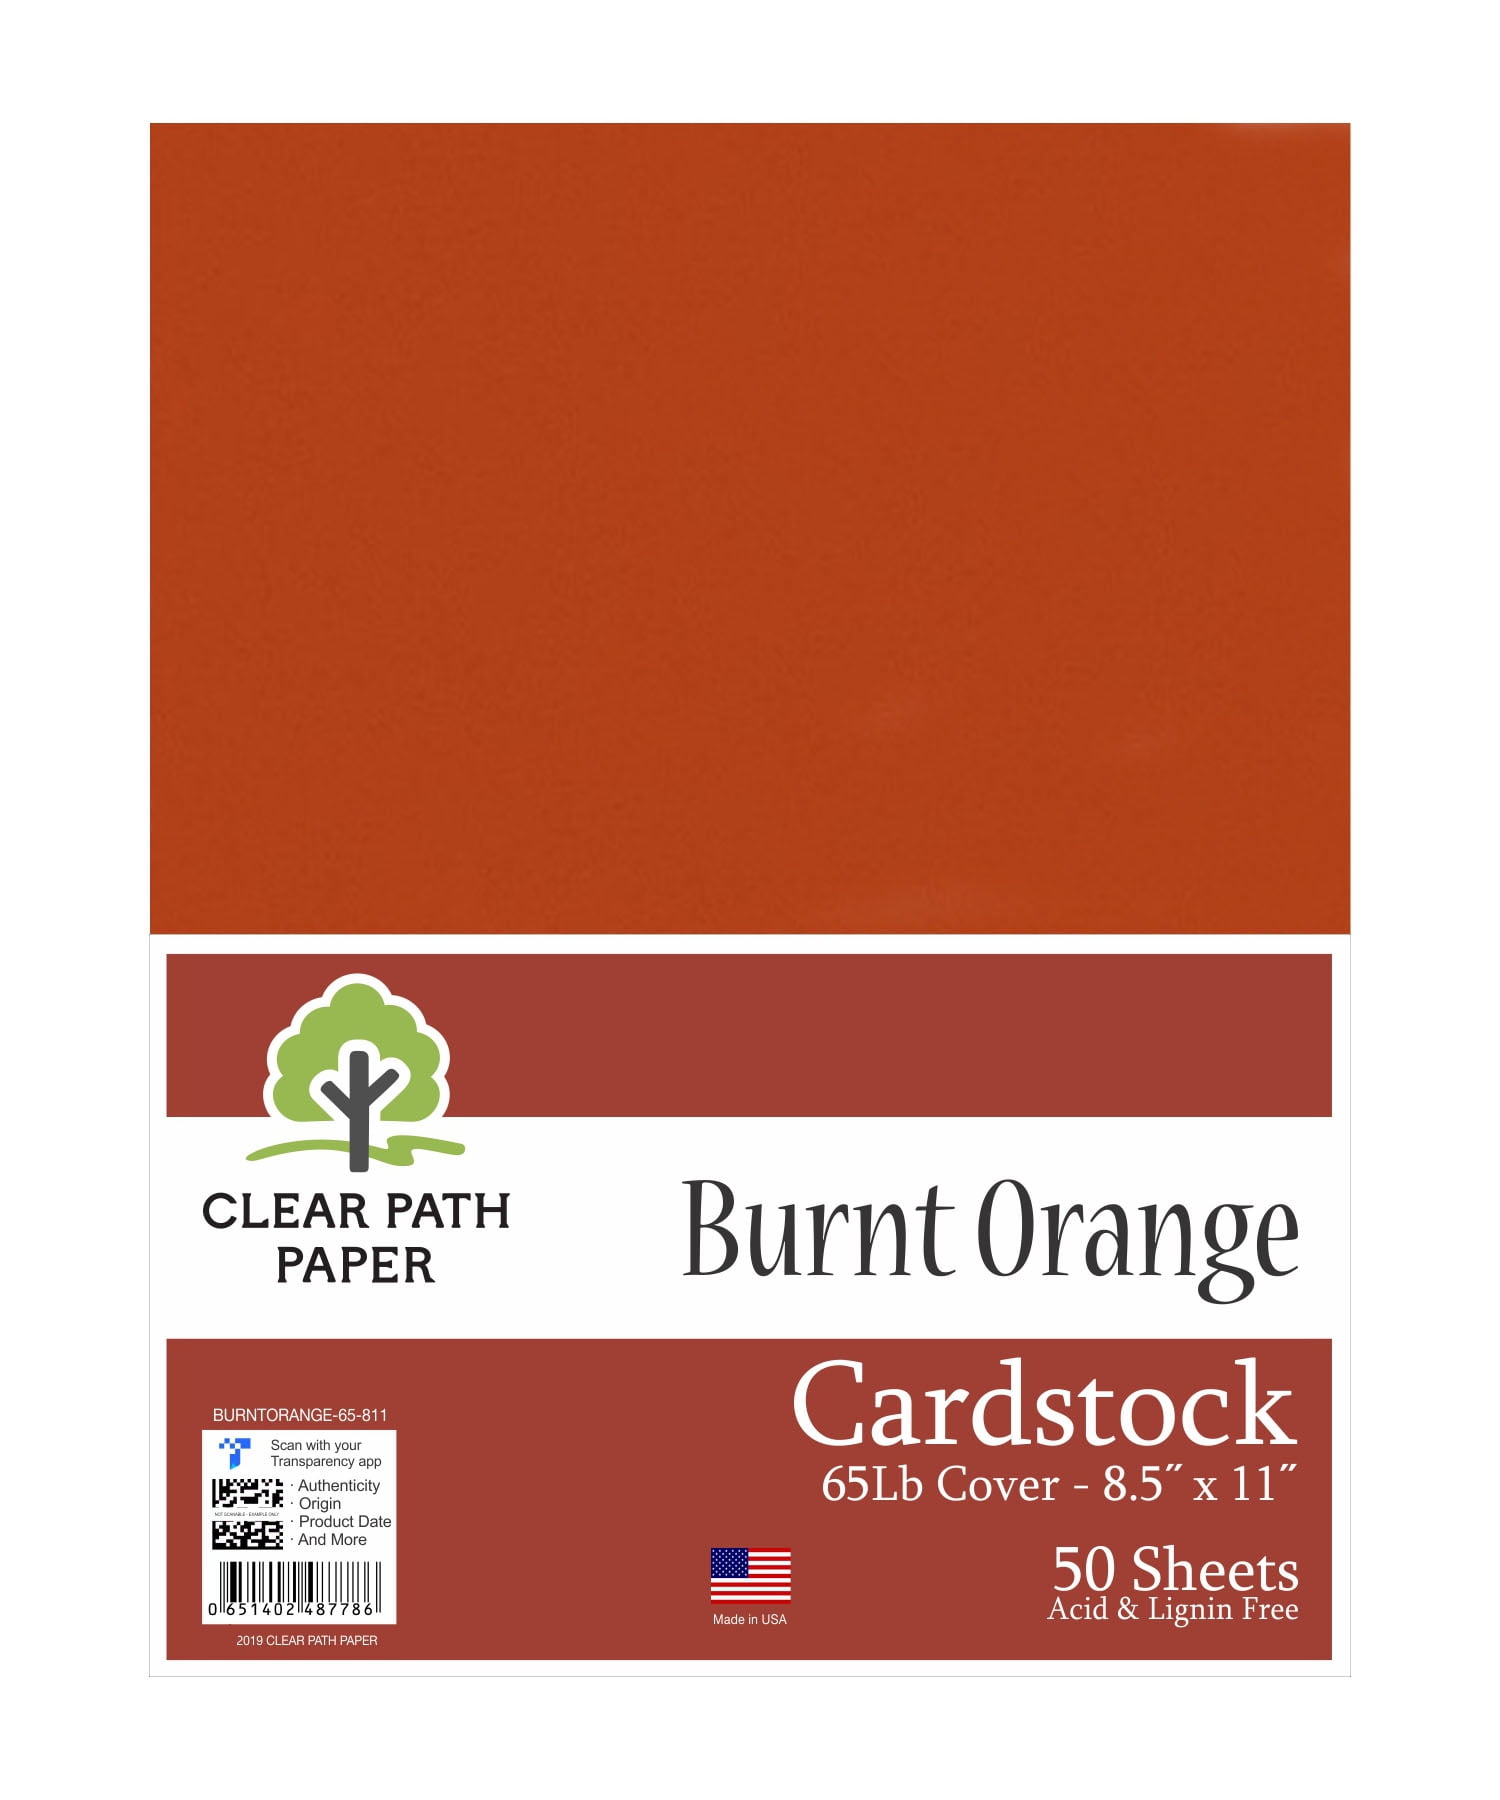 Rustic Oatmeal Brown Cardstock - 8.5 x 11 inch - 80lb Cover - 50 Sheets - Clear Path Paper